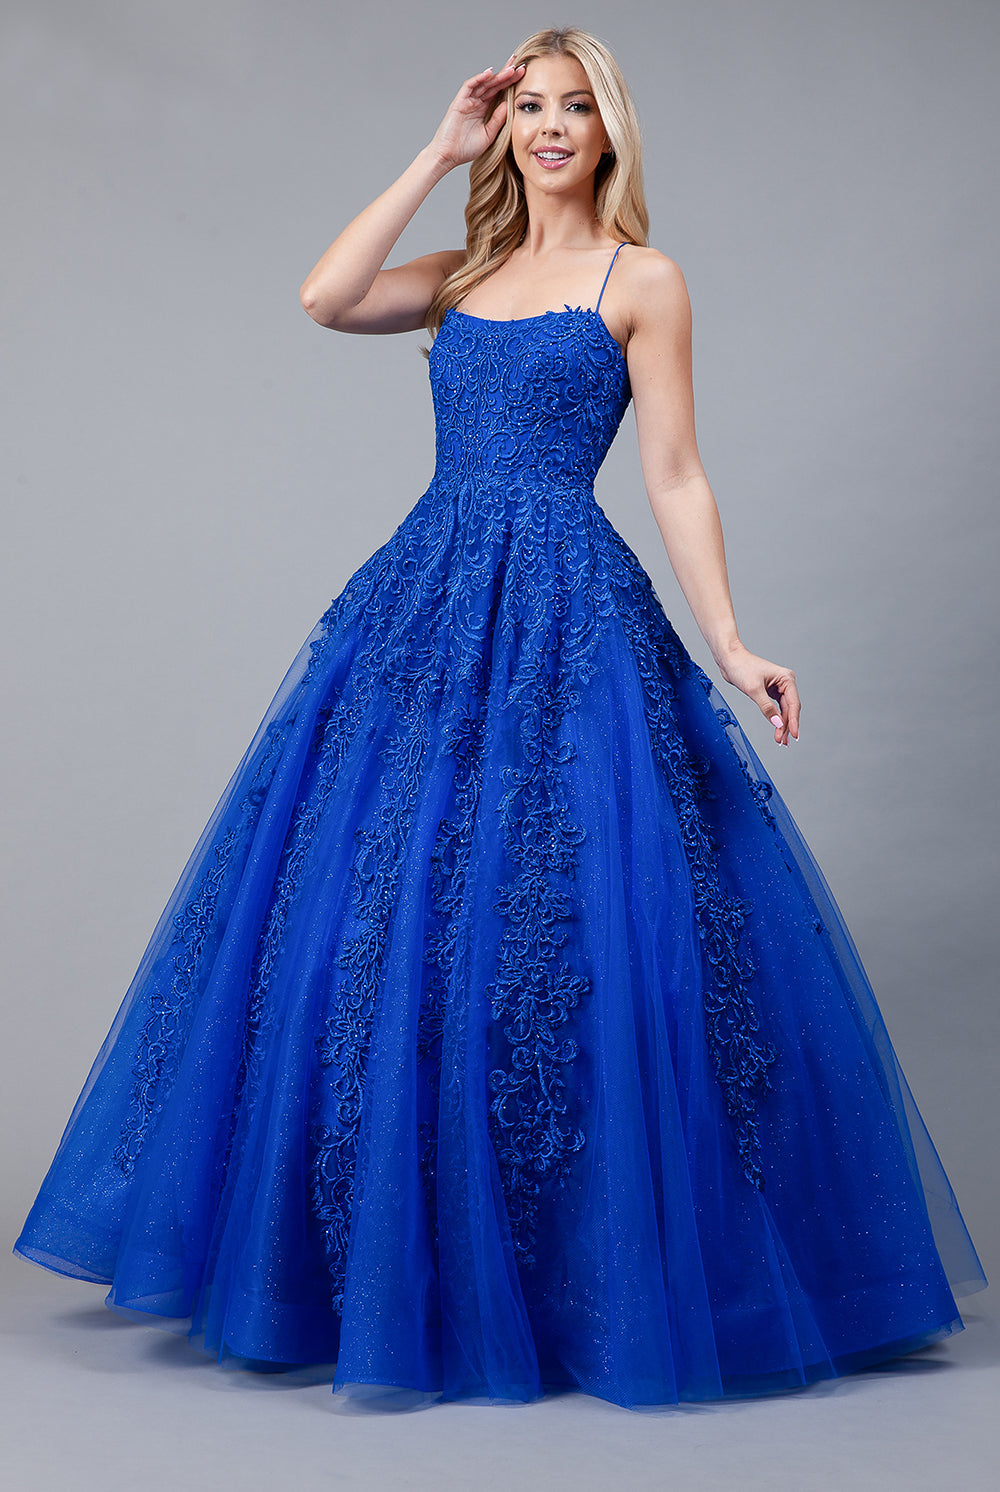 Boat Neck Embroidered Lace Prom Dress w/Lace Up Back-smcdress